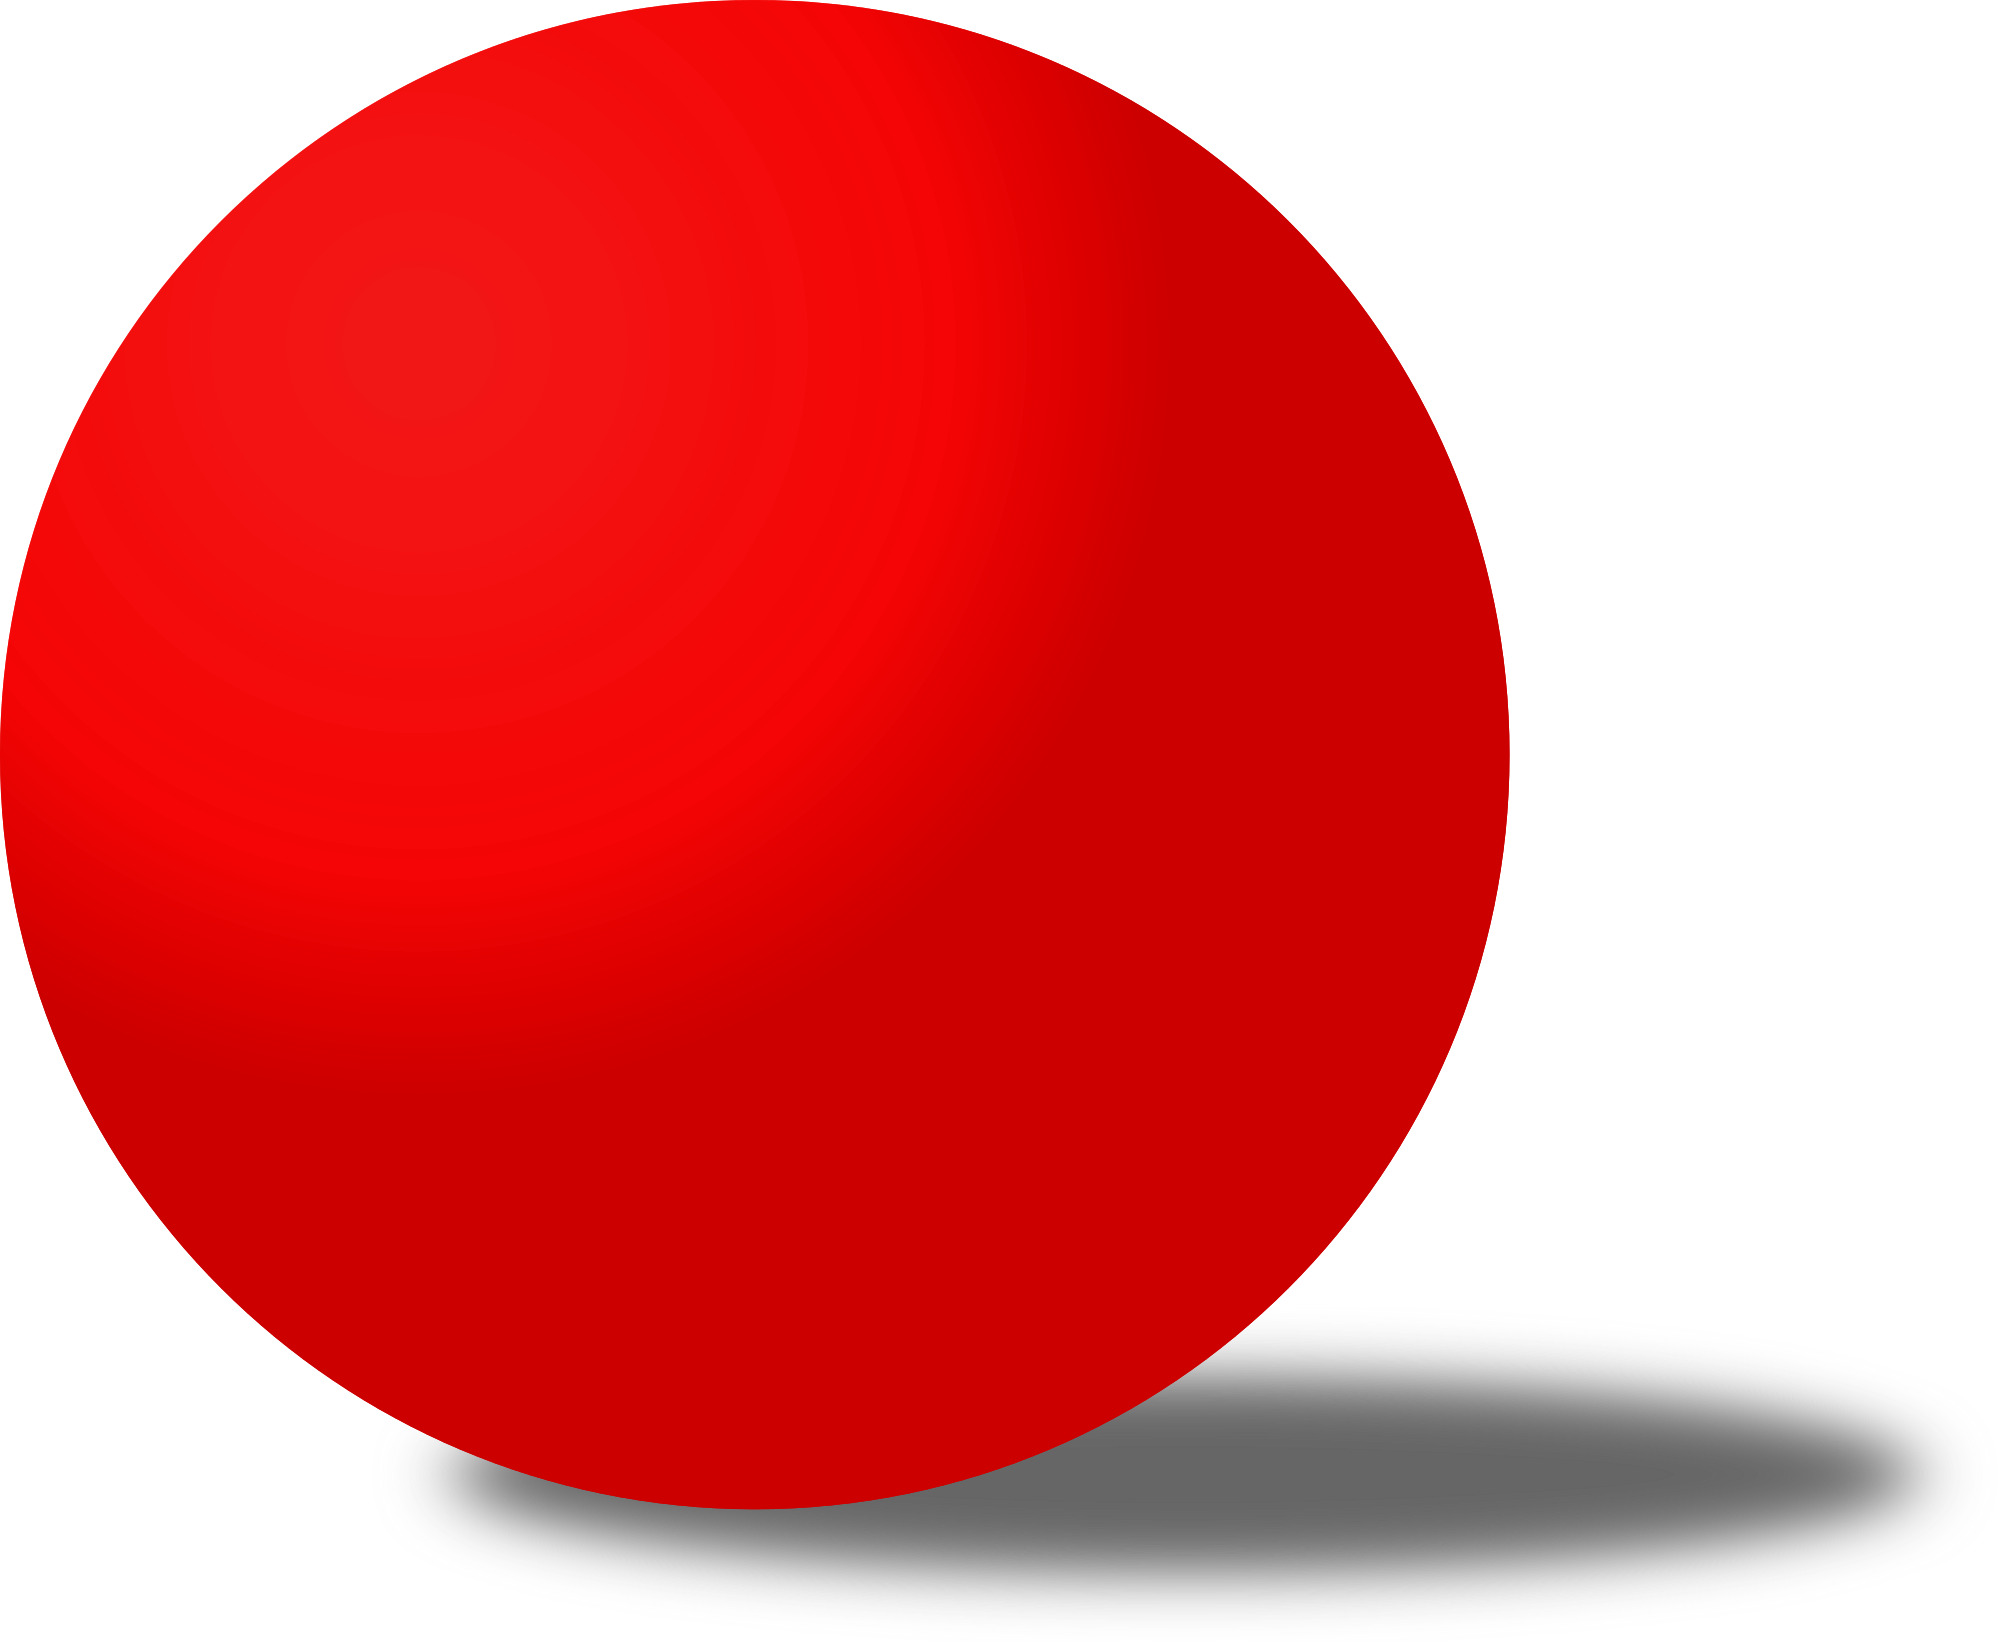 A Red Ball On A Black Background